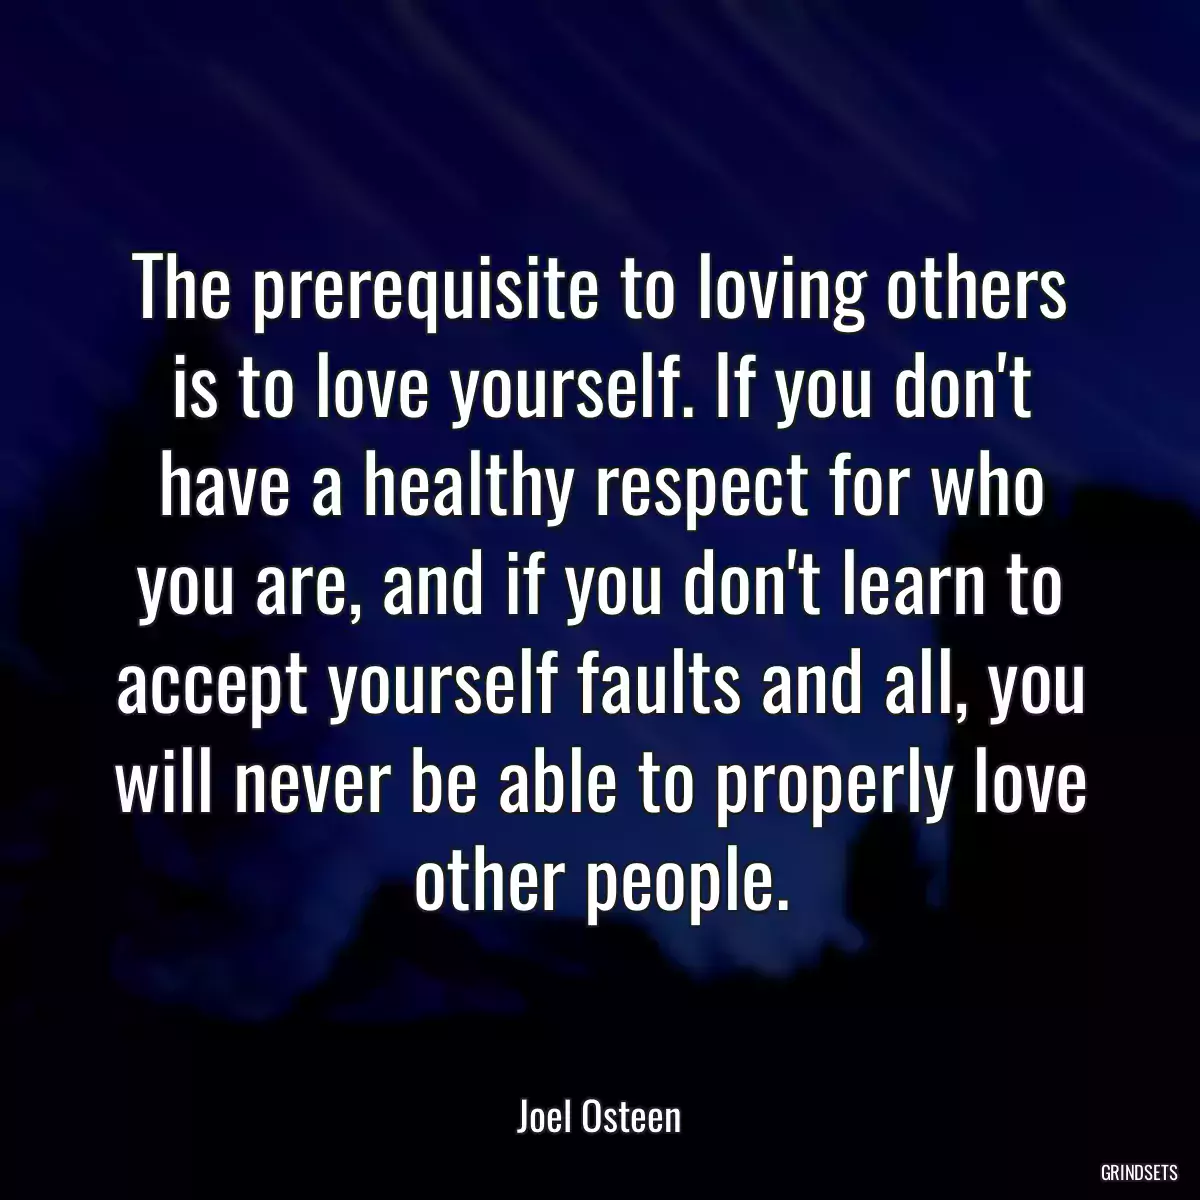 The prerequisite to loving others is to love yourself. If you don\'t have a healthy respect for who you are, and if you don\'t learn to accept yourself faults and all, you will never be able to properly love other people.